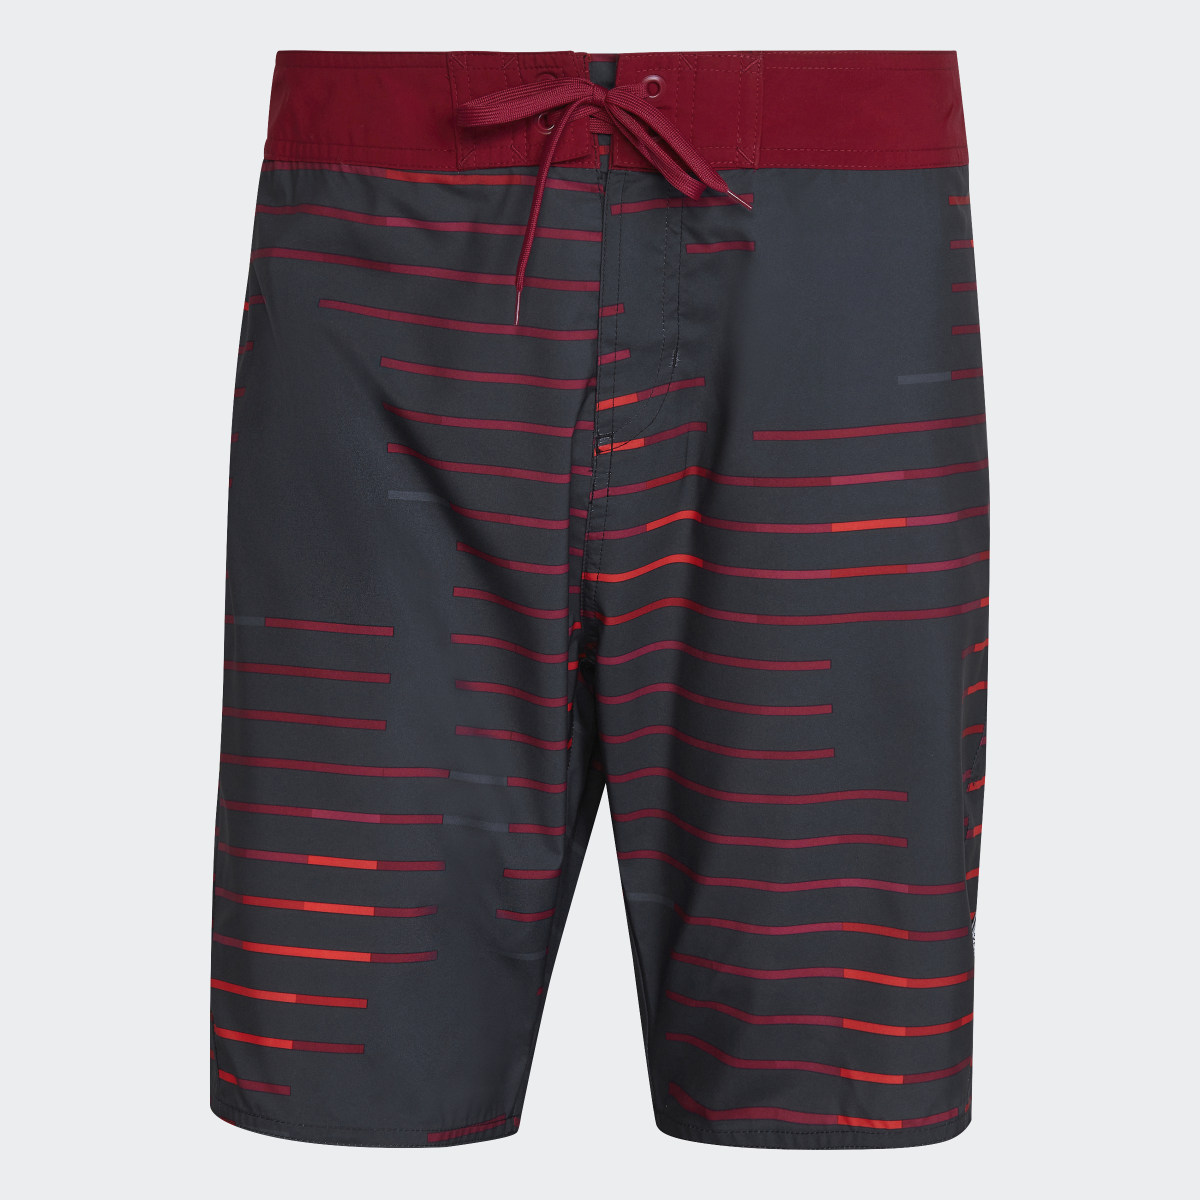 Adidas Classic Length Melbourne Graphic Board Shorts. 4